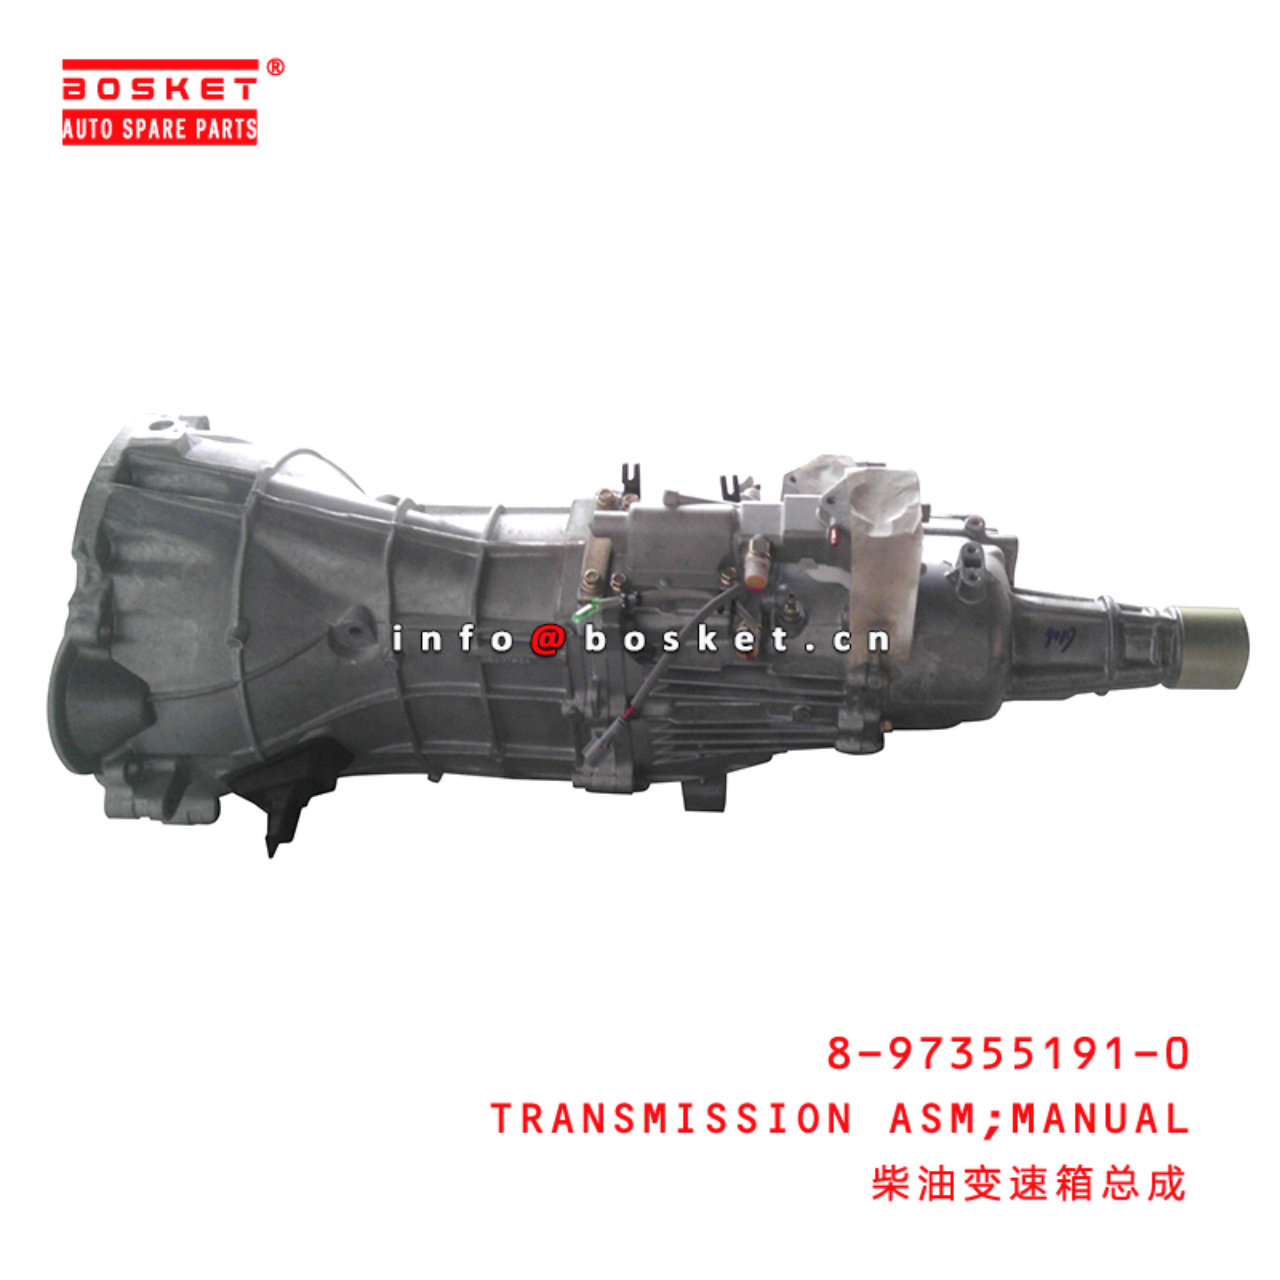 8-97355191-0 Manual Transmission Assembly Suitable for ISUZU DMAX 8973551910